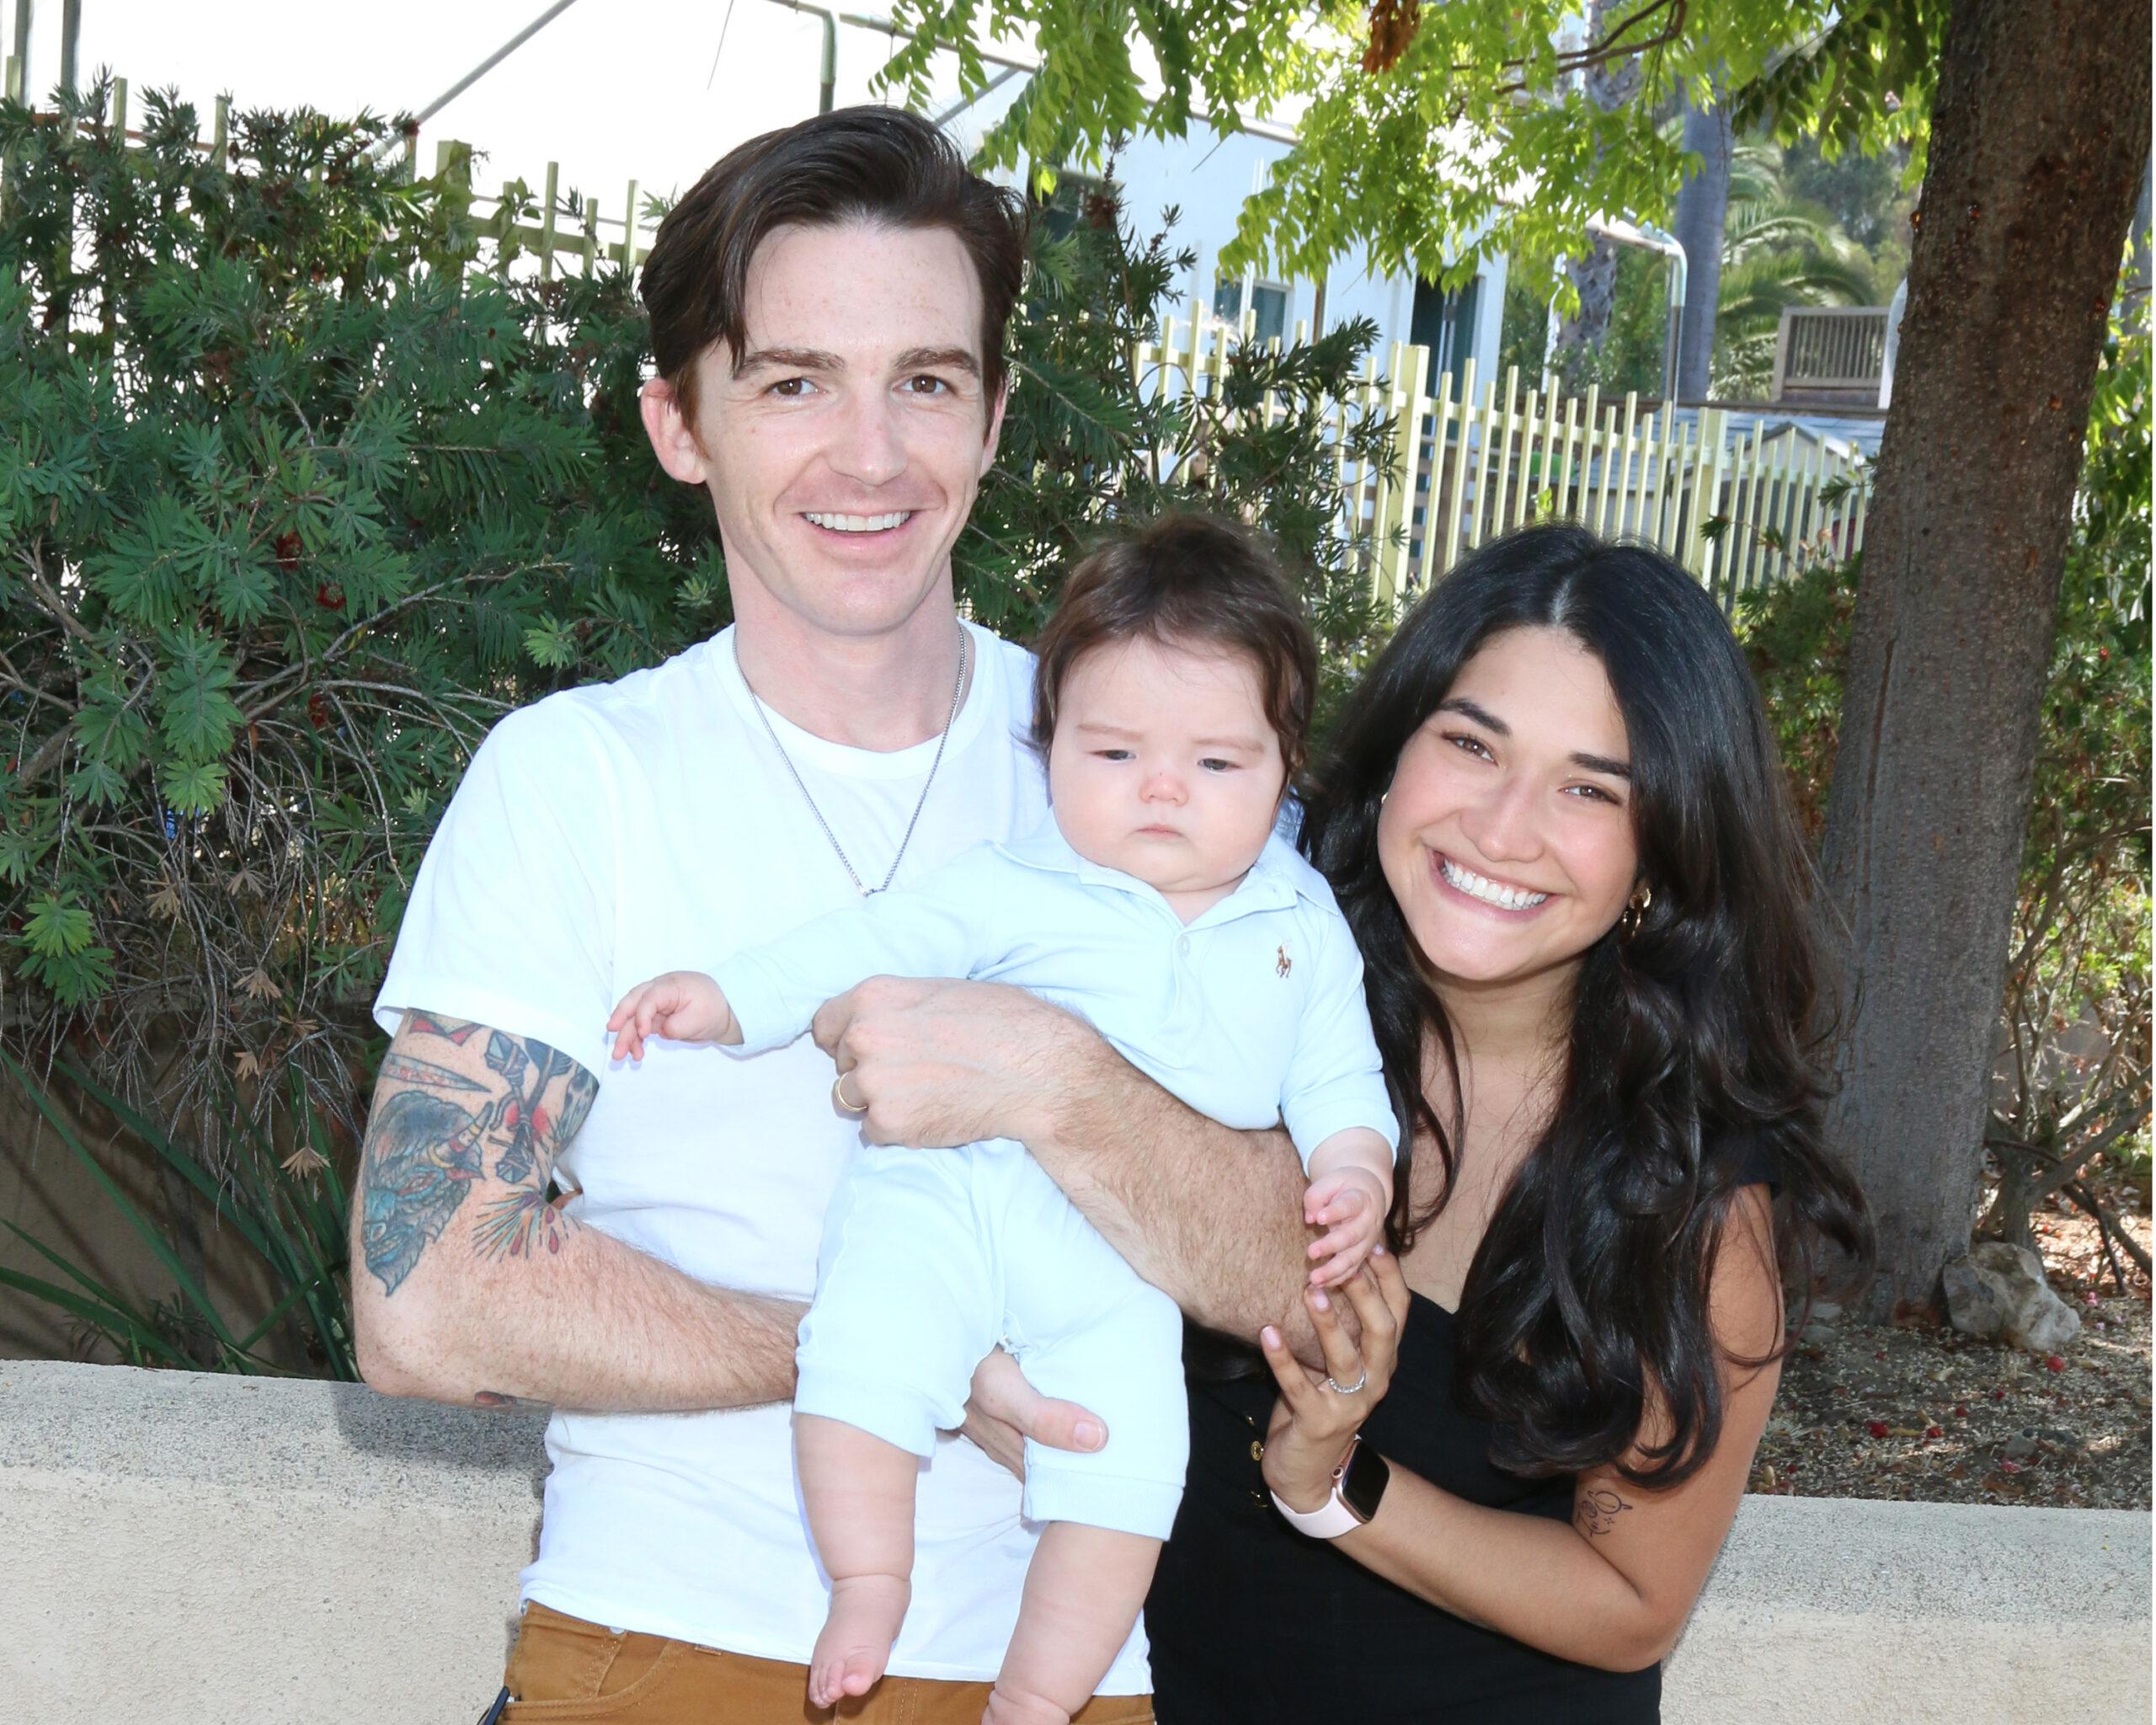 Drake Bell And Wife Janet Von Schmeling Have Reportedly Separated As The Singer Enters 'Treatment'